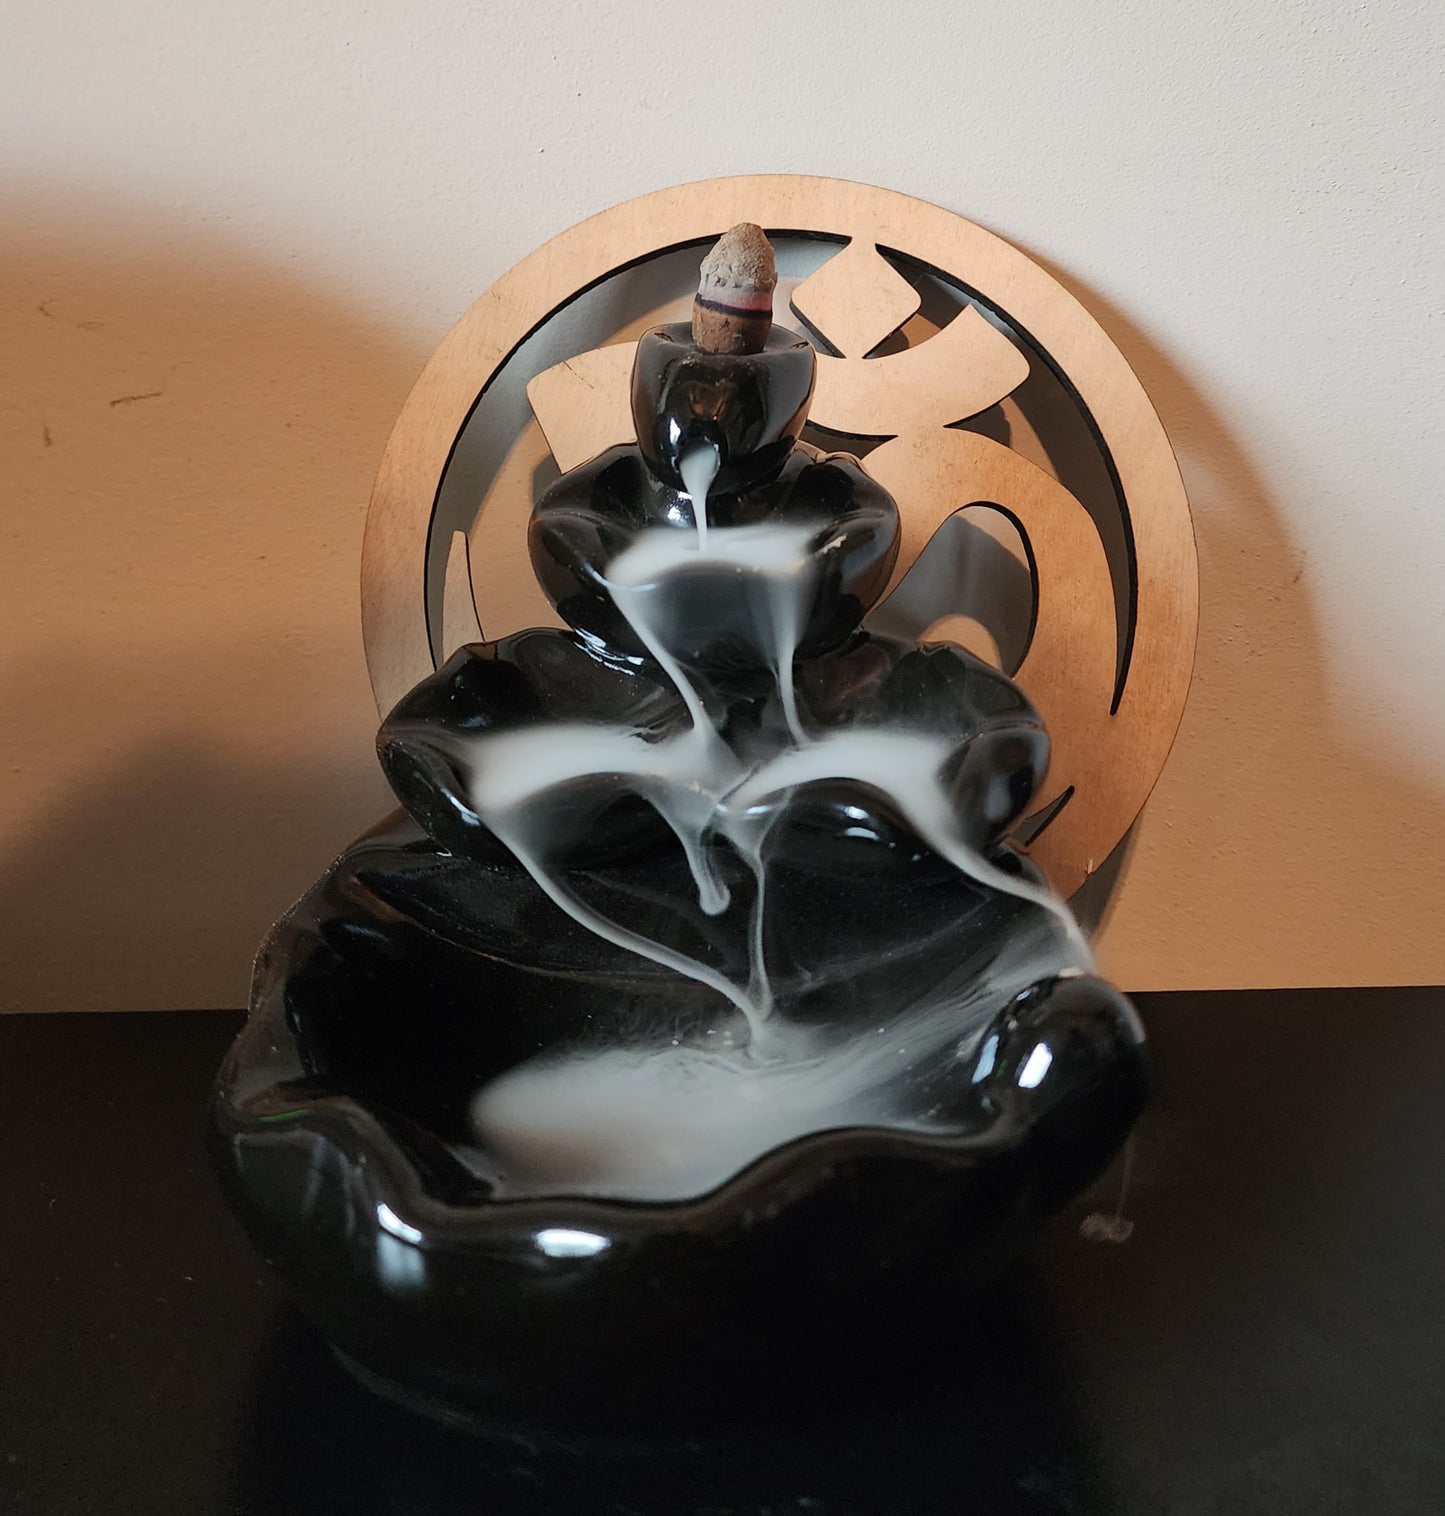 Large Incense Cone Holder #Great Deal #Holistic #Spiritual #Evocation #SpiritDrawing #Incensecones